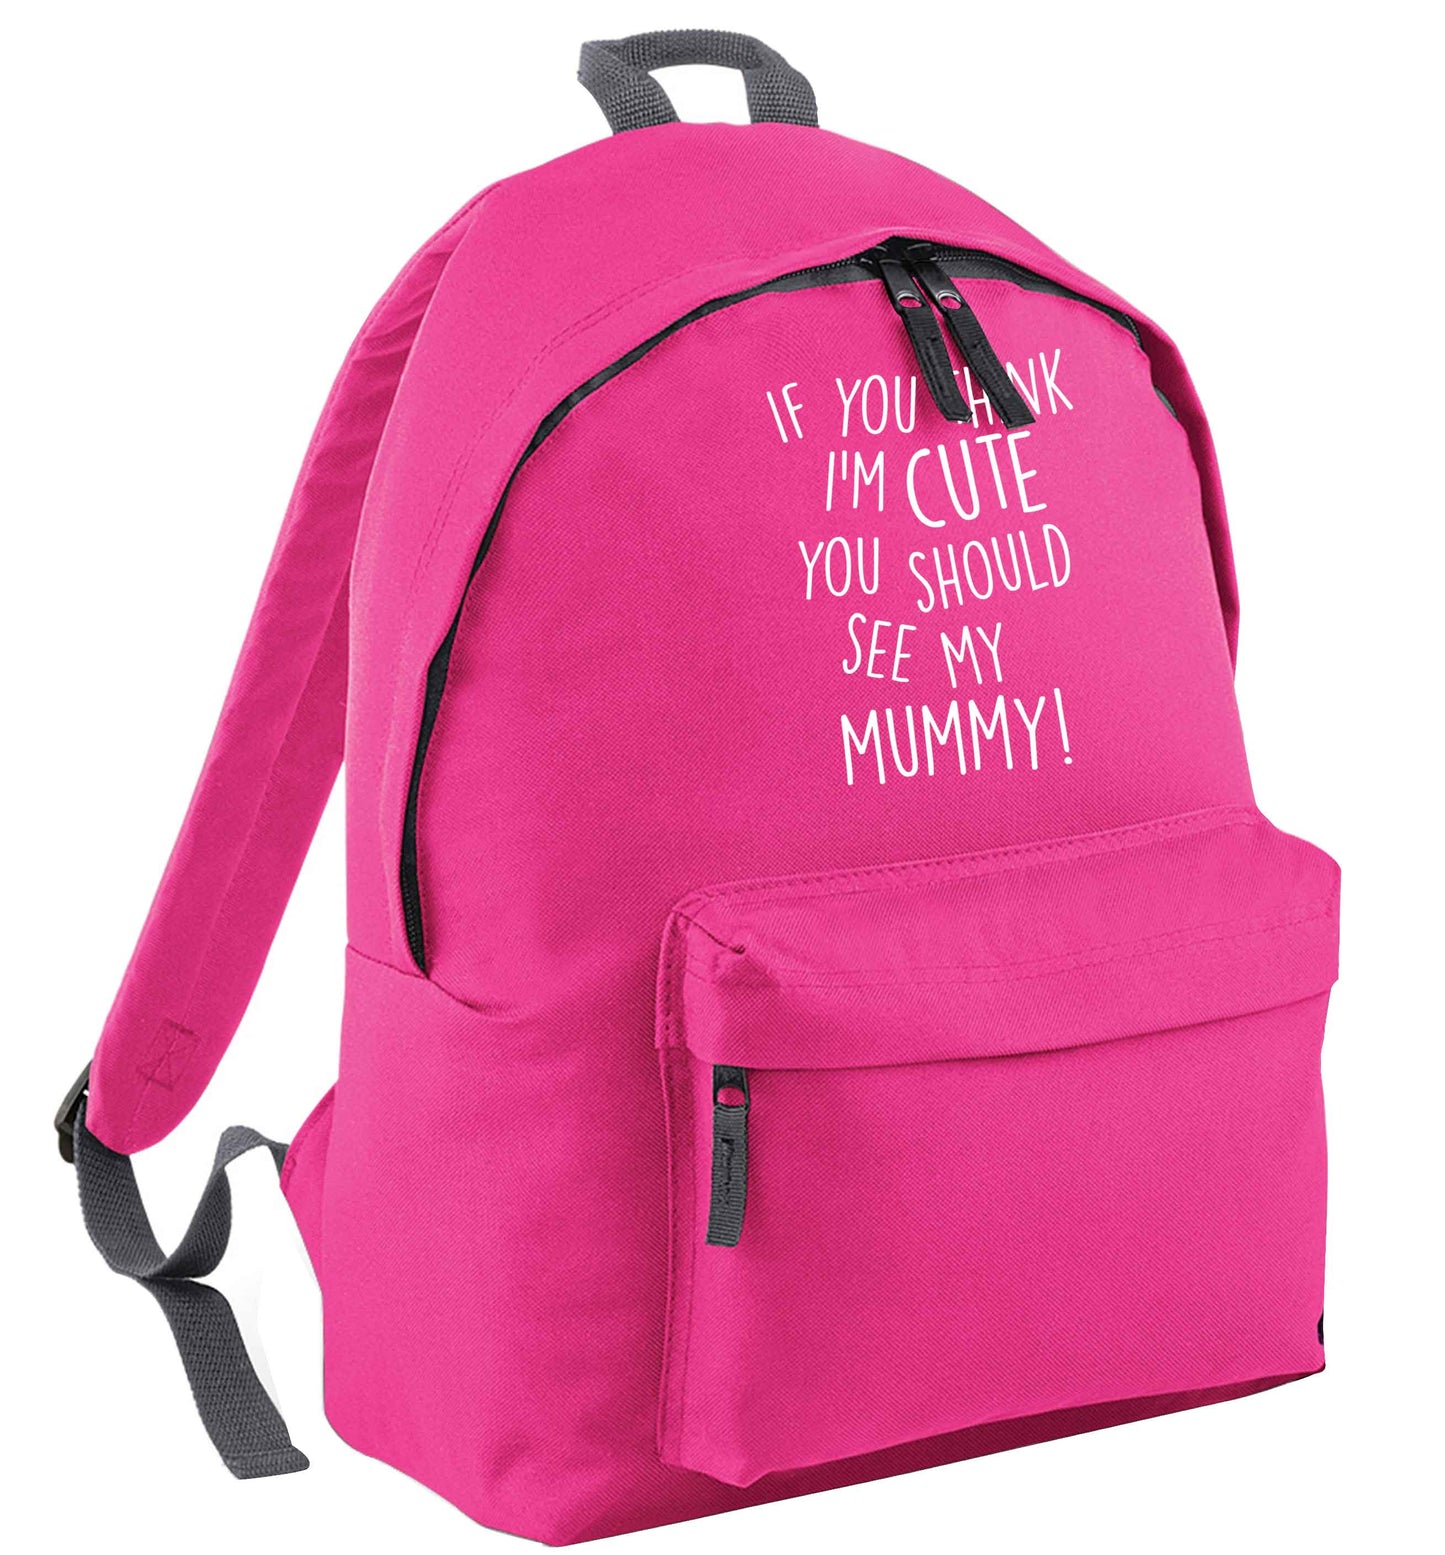 If you think I'm cute you should see my mummy pink adults backpack